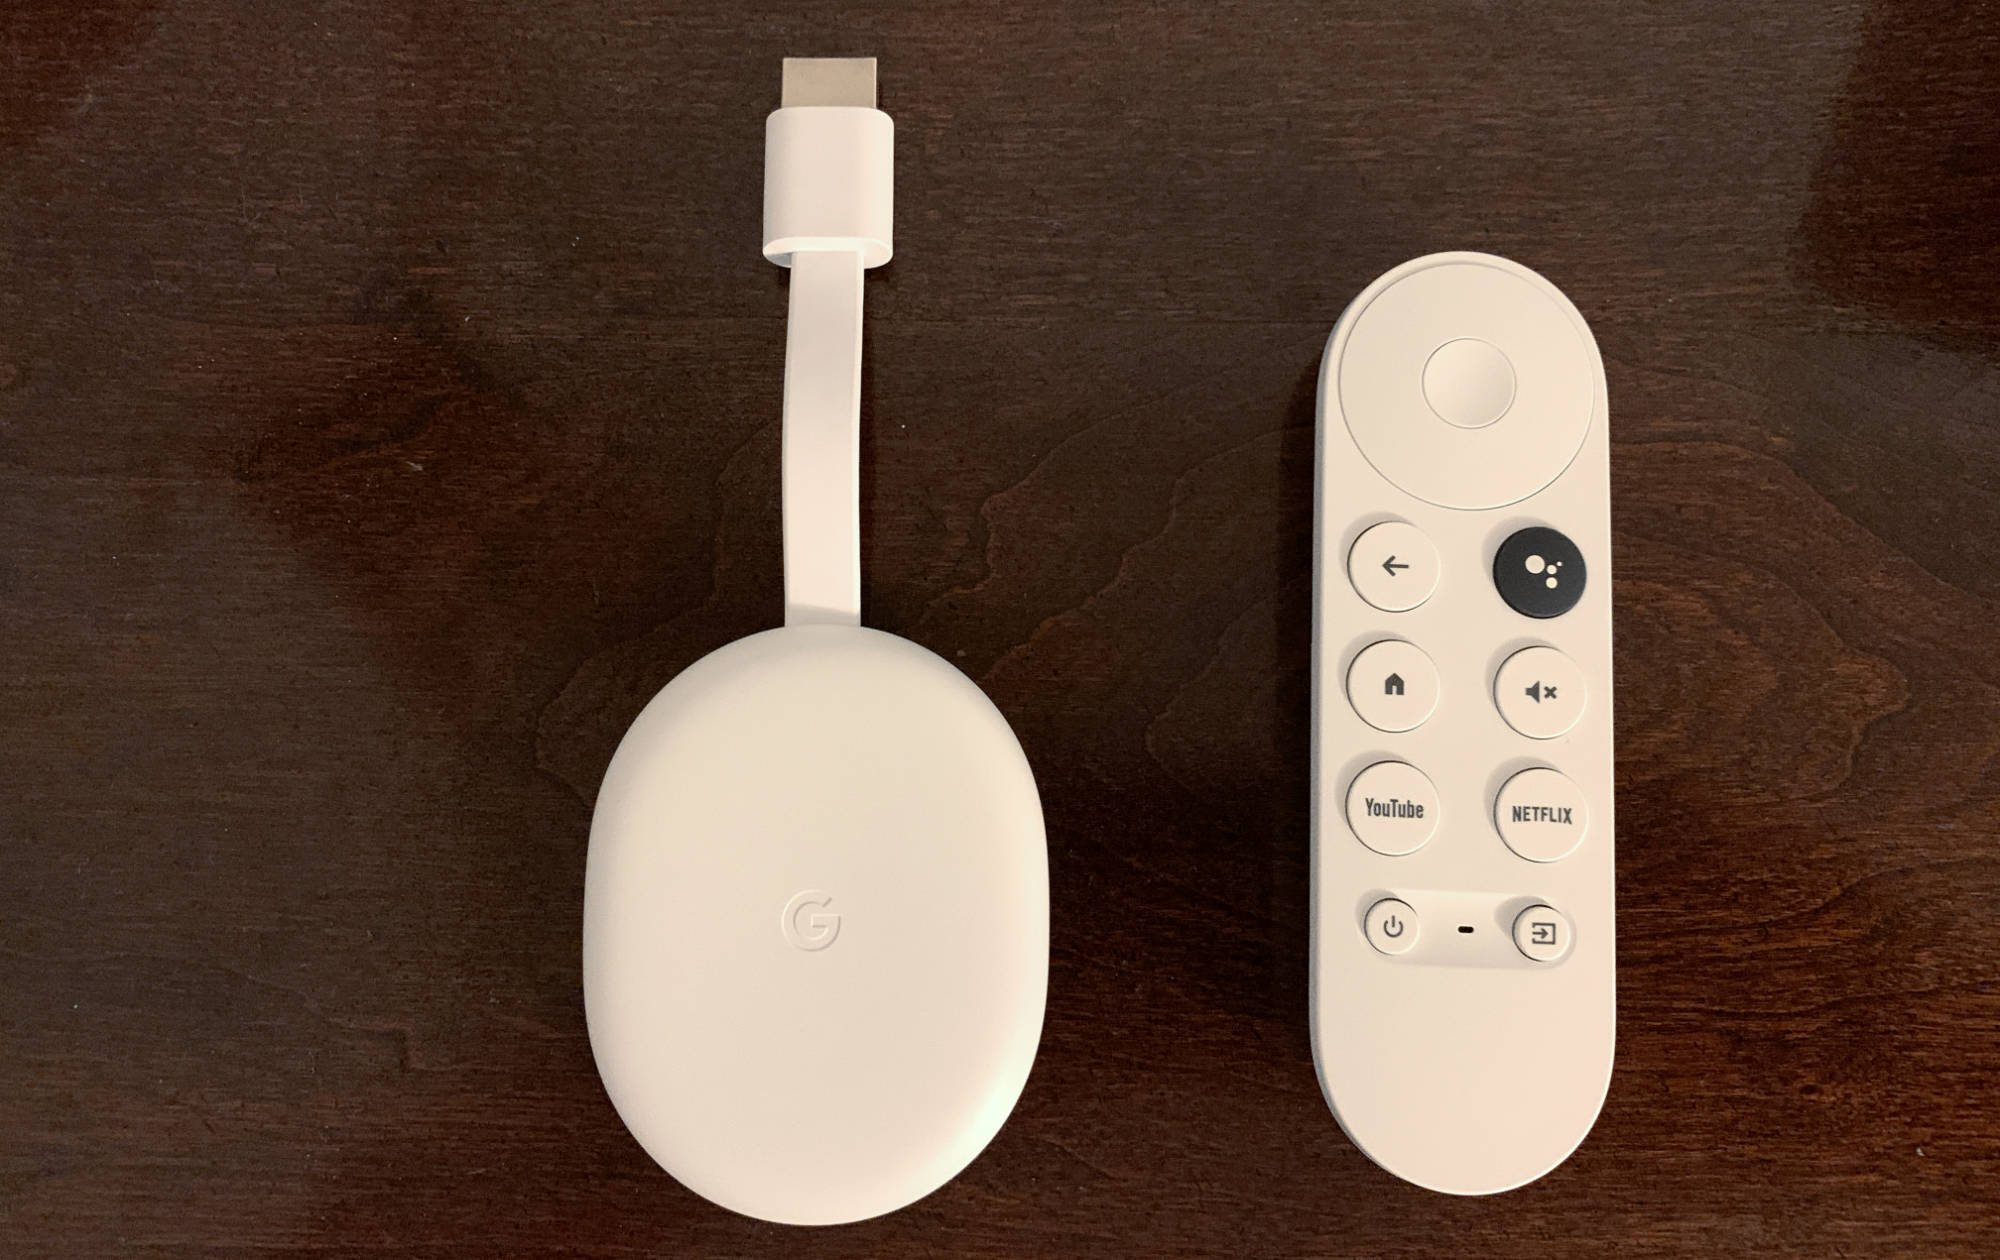 The Chromecast with Google TV is pictured alongside the Google Assistant voice remote.